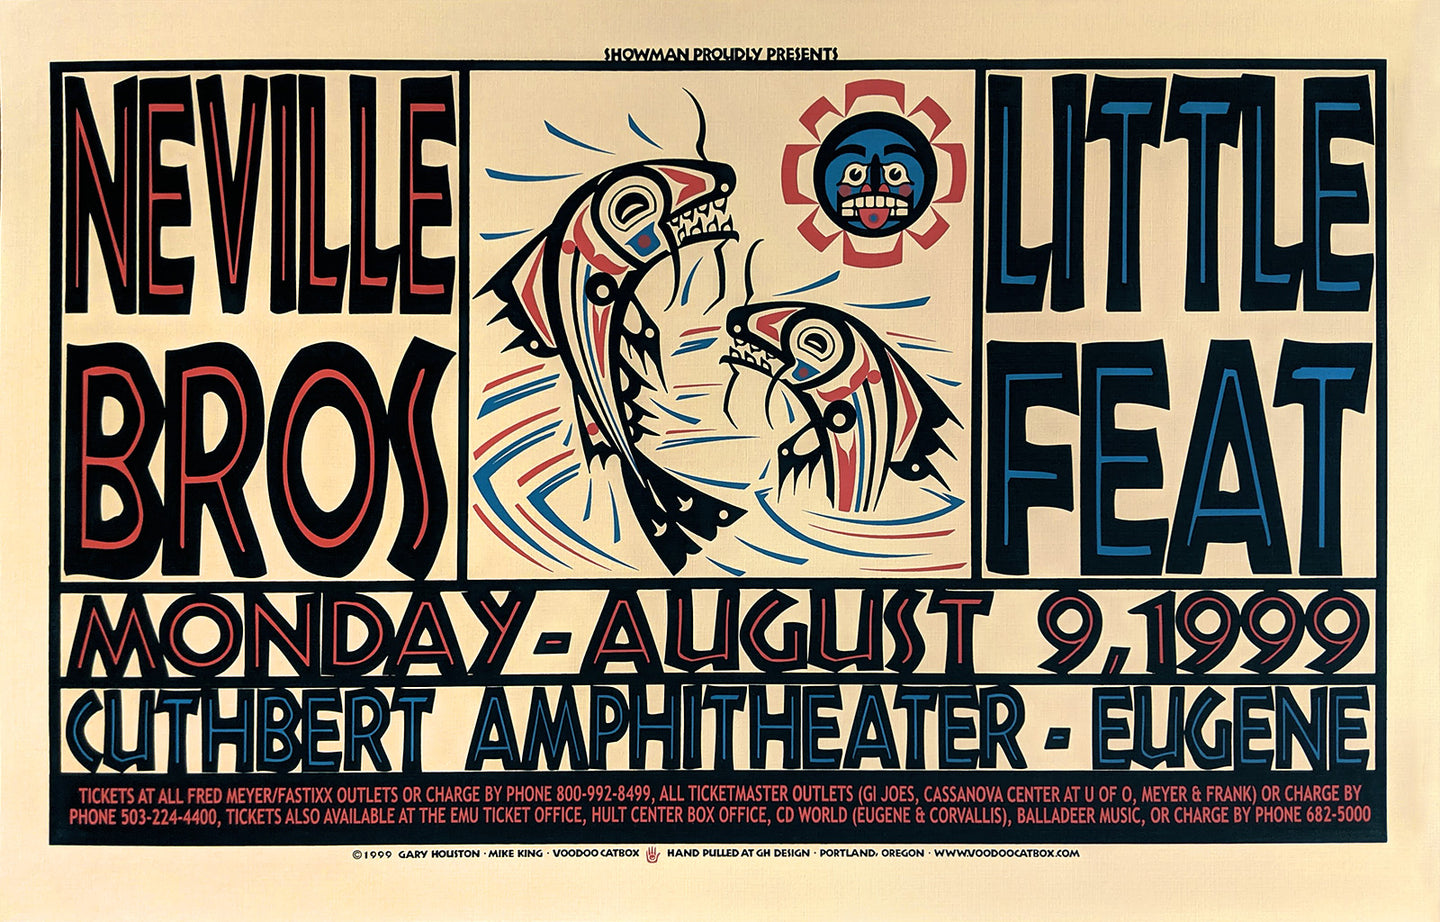 Little Feat #2 • Neville Brothers